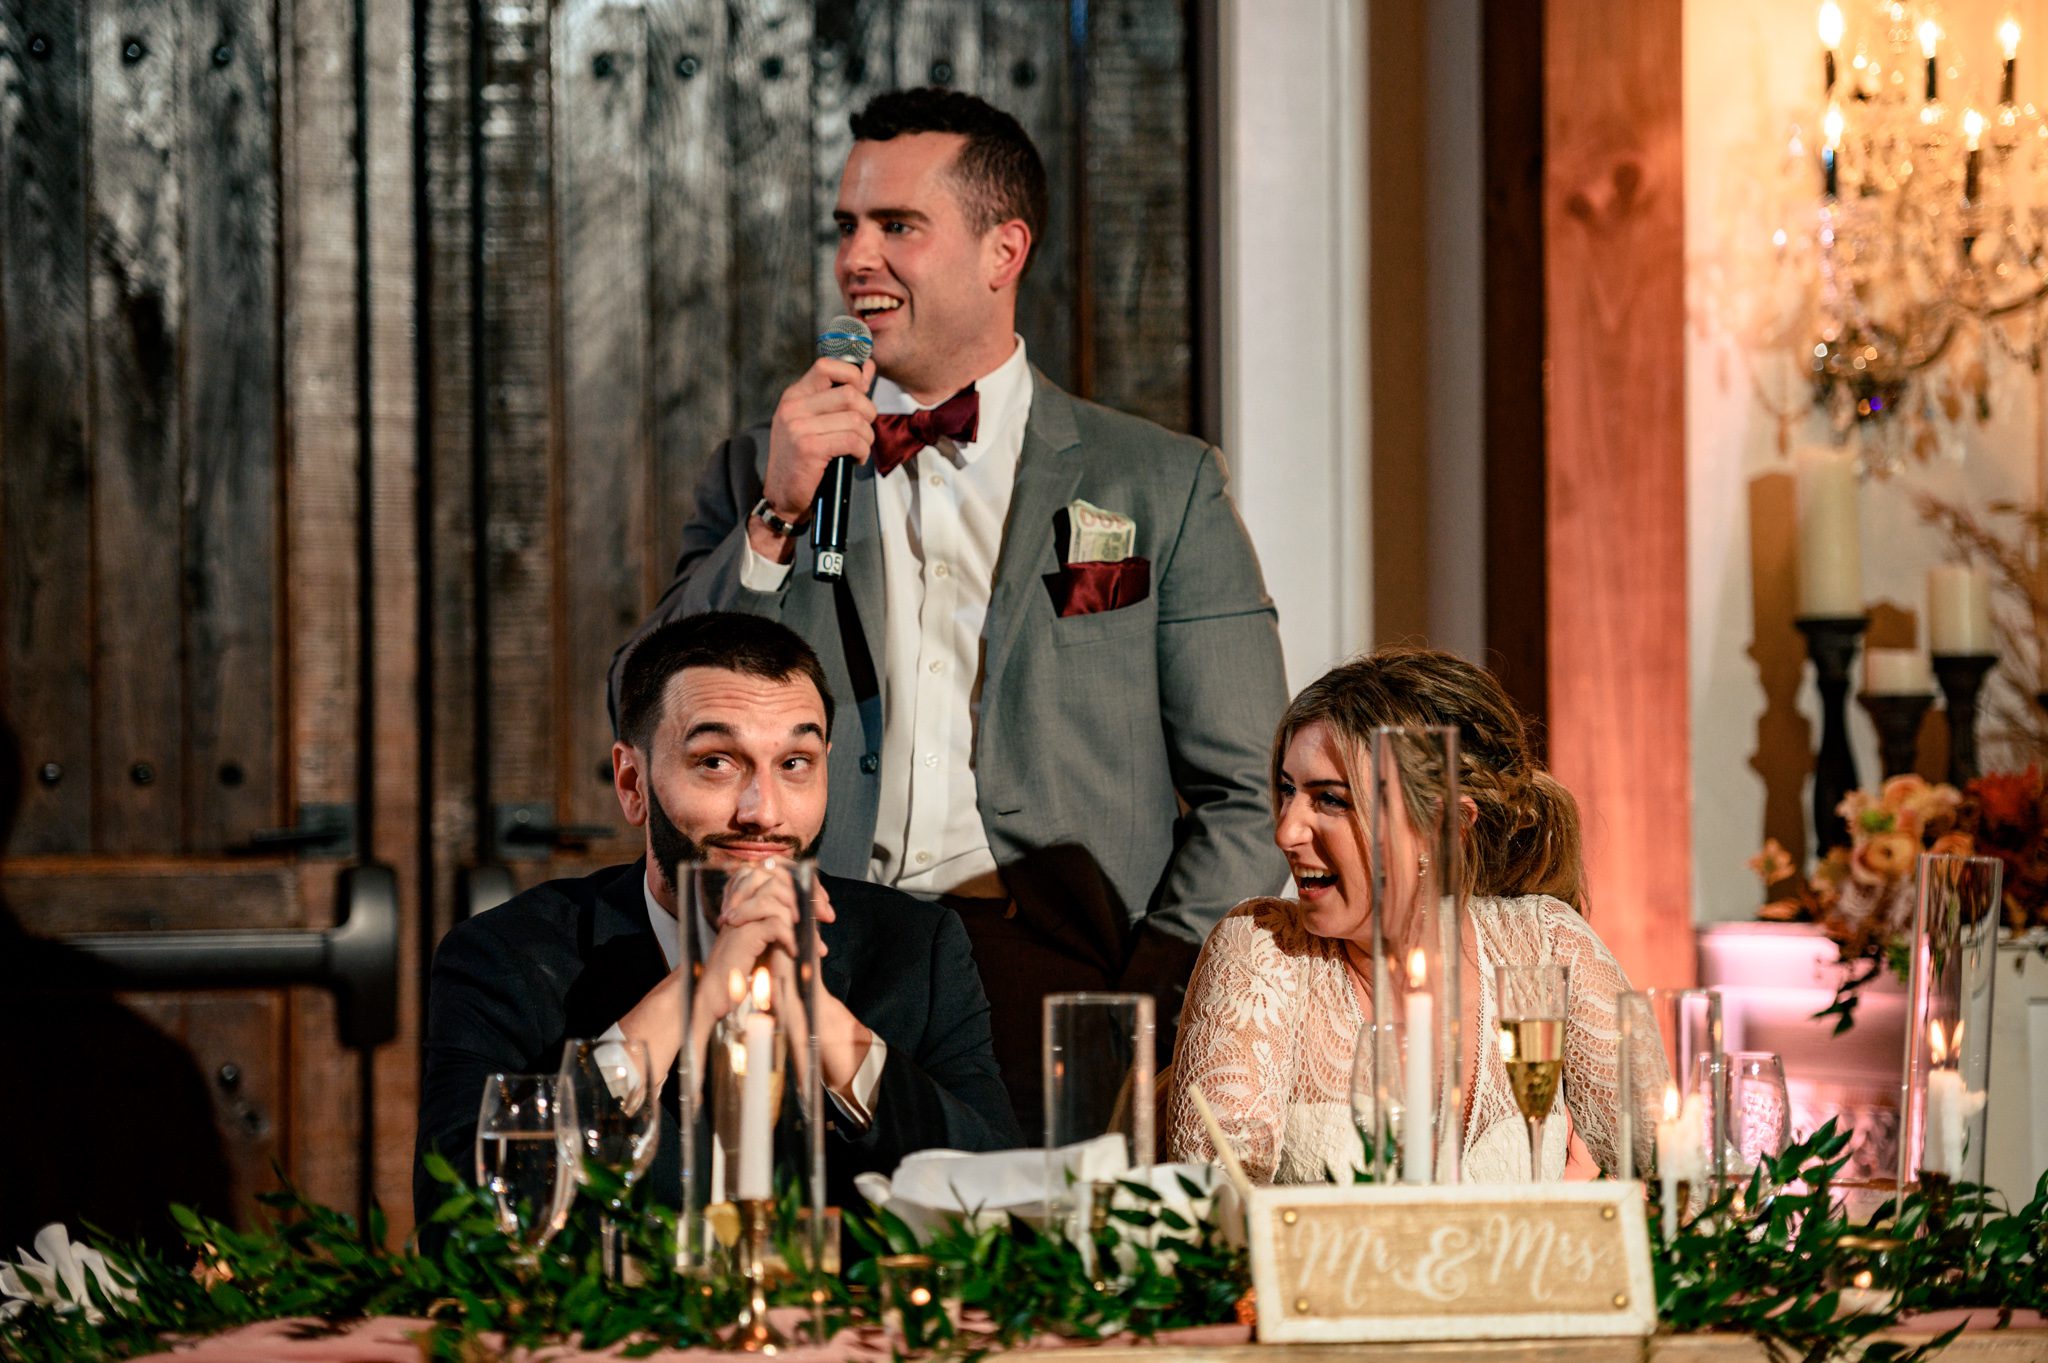 Bride and groom laugh heavily during the toast portion of their wedding reception